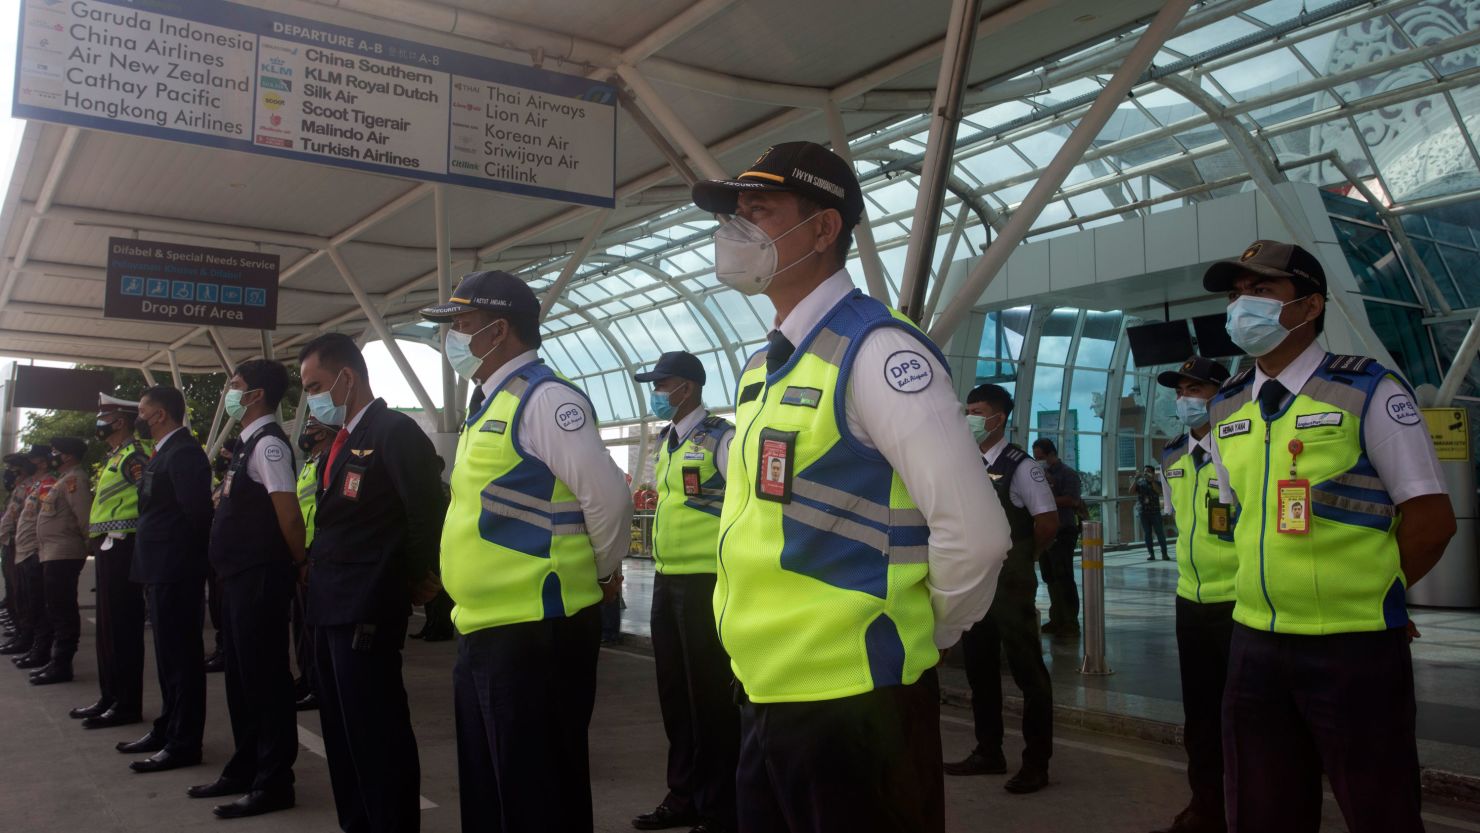 Airport security personnel line up during a briefing in preparation of the reopening of International Ngurah Rai Airport in Bali, Indonesia, Thursday, Oct. 14, 2021. The Indonesian resort island of Bali welcomed international travelers to its shops and white-sand beaches for the first time in more than a year Thursday - if they're vaccinated, test negative, hail from certain countries, quarantine and heed restrictions in public. (AP Photo/Firdia Lisnawati)